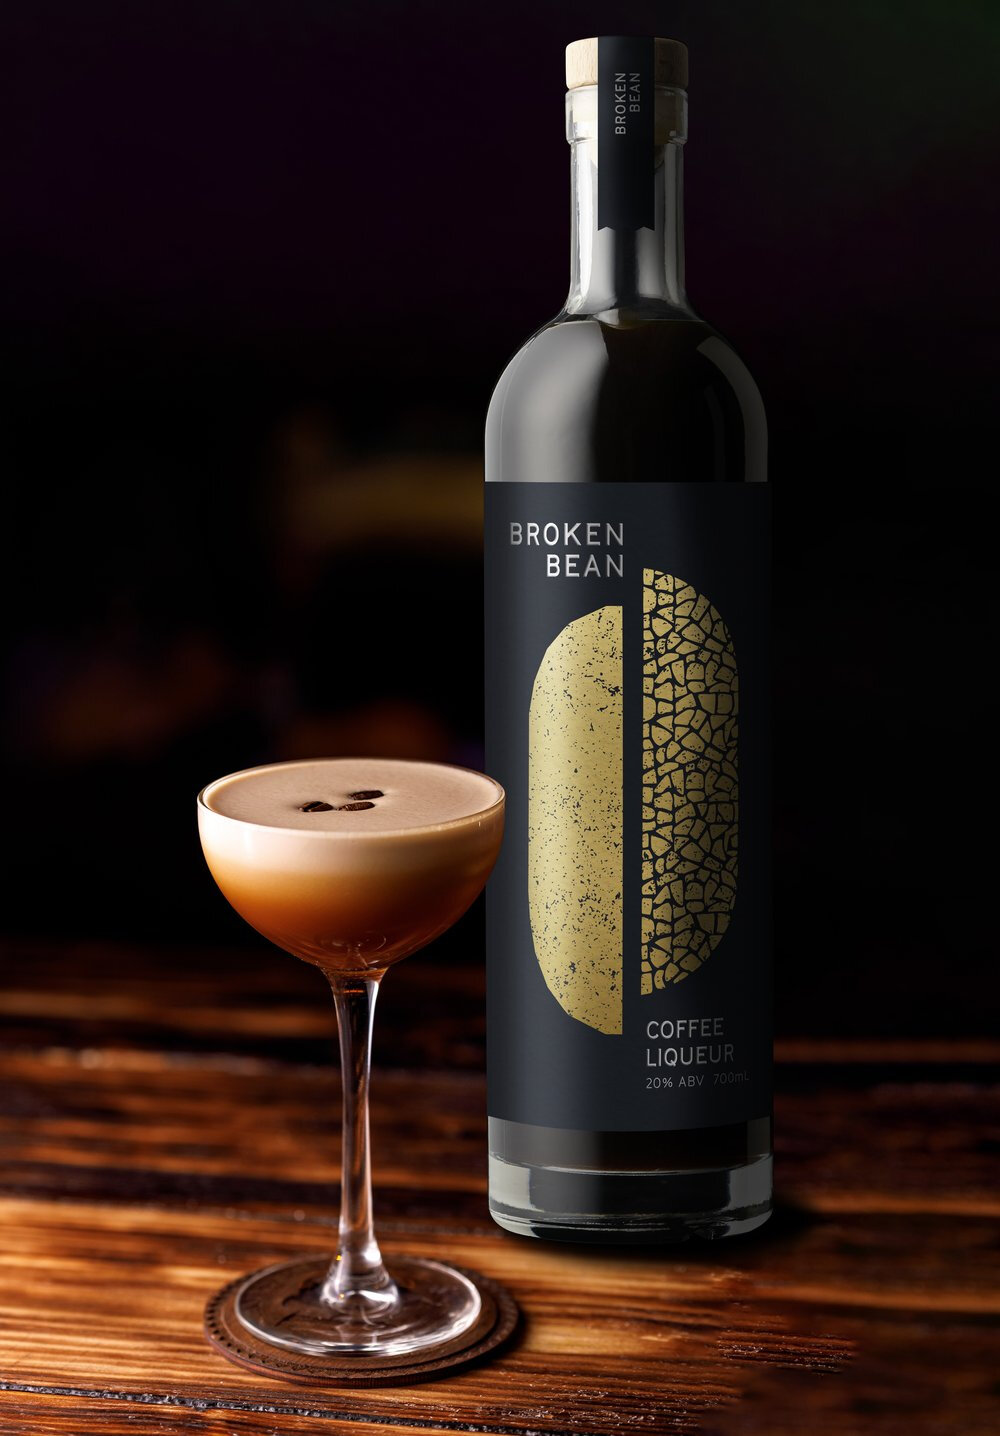 We saw @brokenbeanspirits at another festival a few weeks ago and were absolutely blown away by their Espresso Martini &amp; coffee liquor. This is an absolute must-taste on your list.